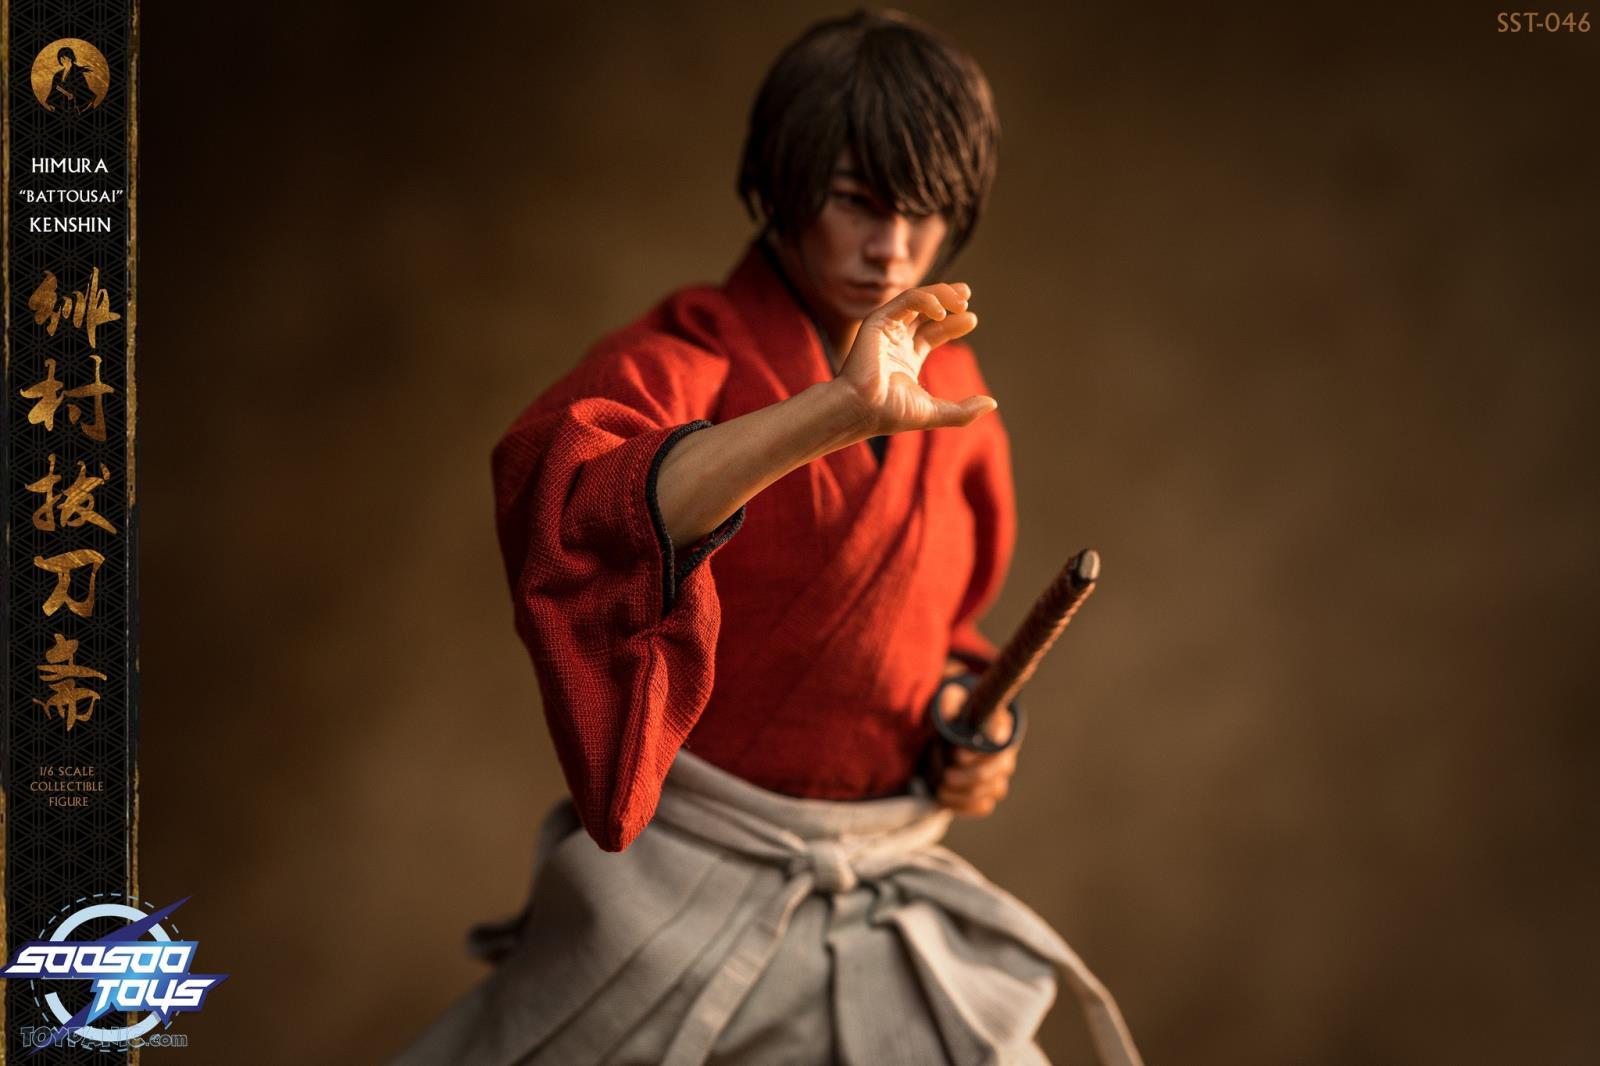 japanese - NEW PRODUCT: 1/6 scale Rurouni Kenshin Collectible Figure from SooSooToys 712202251230PM_5762173